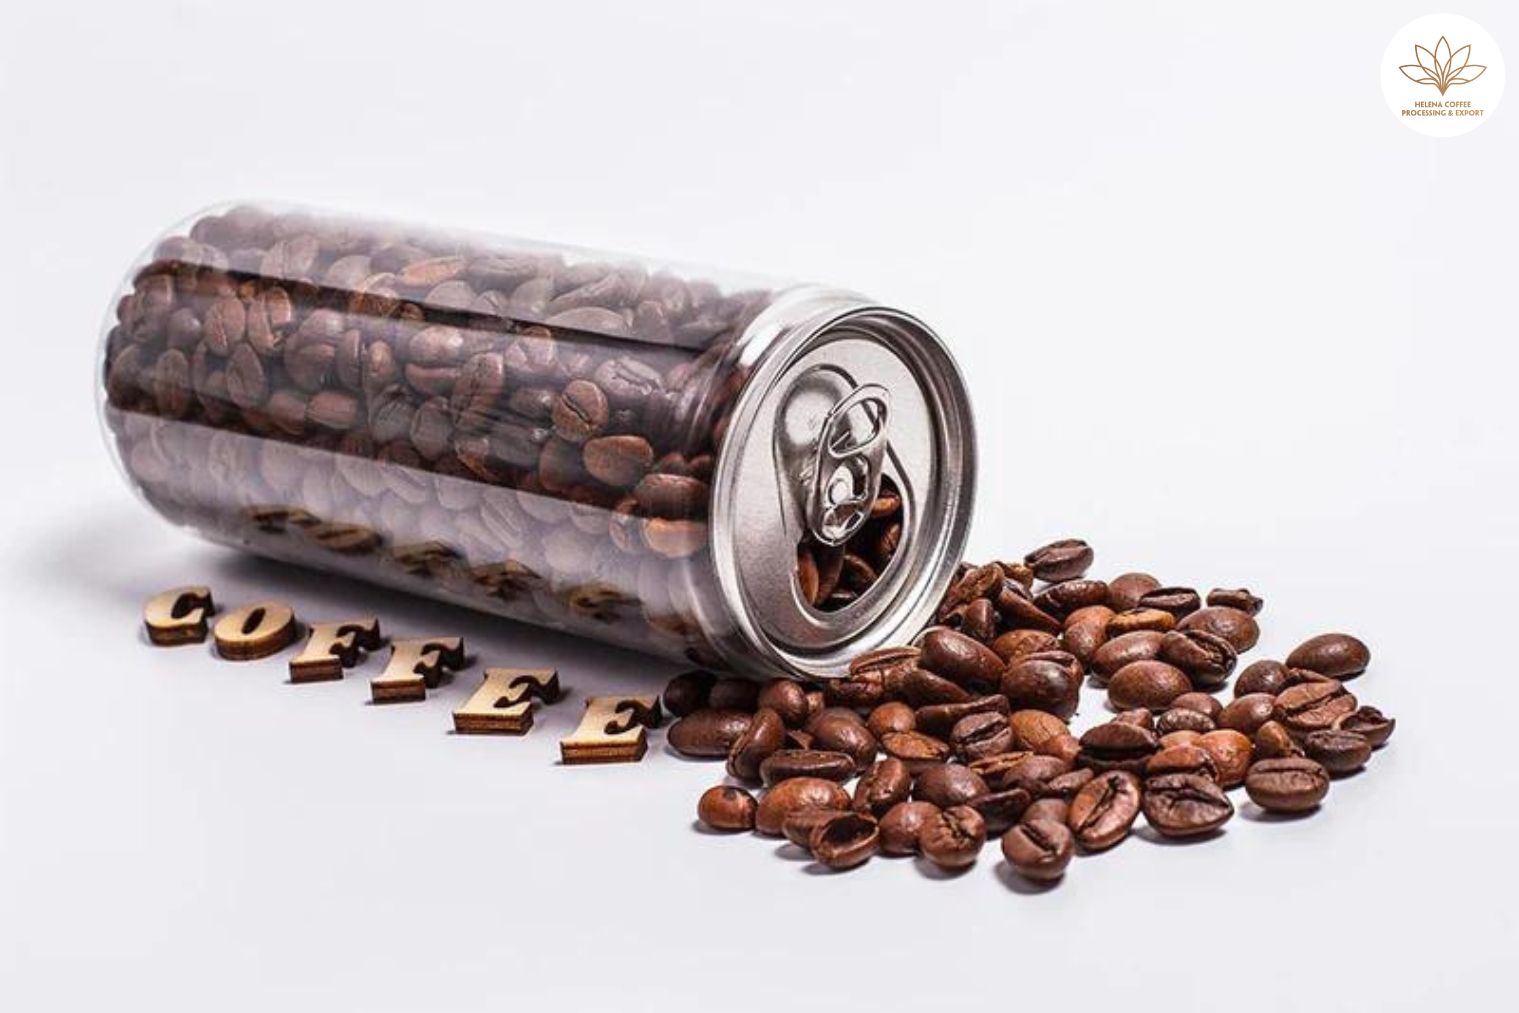 canned coffee invented in Japan